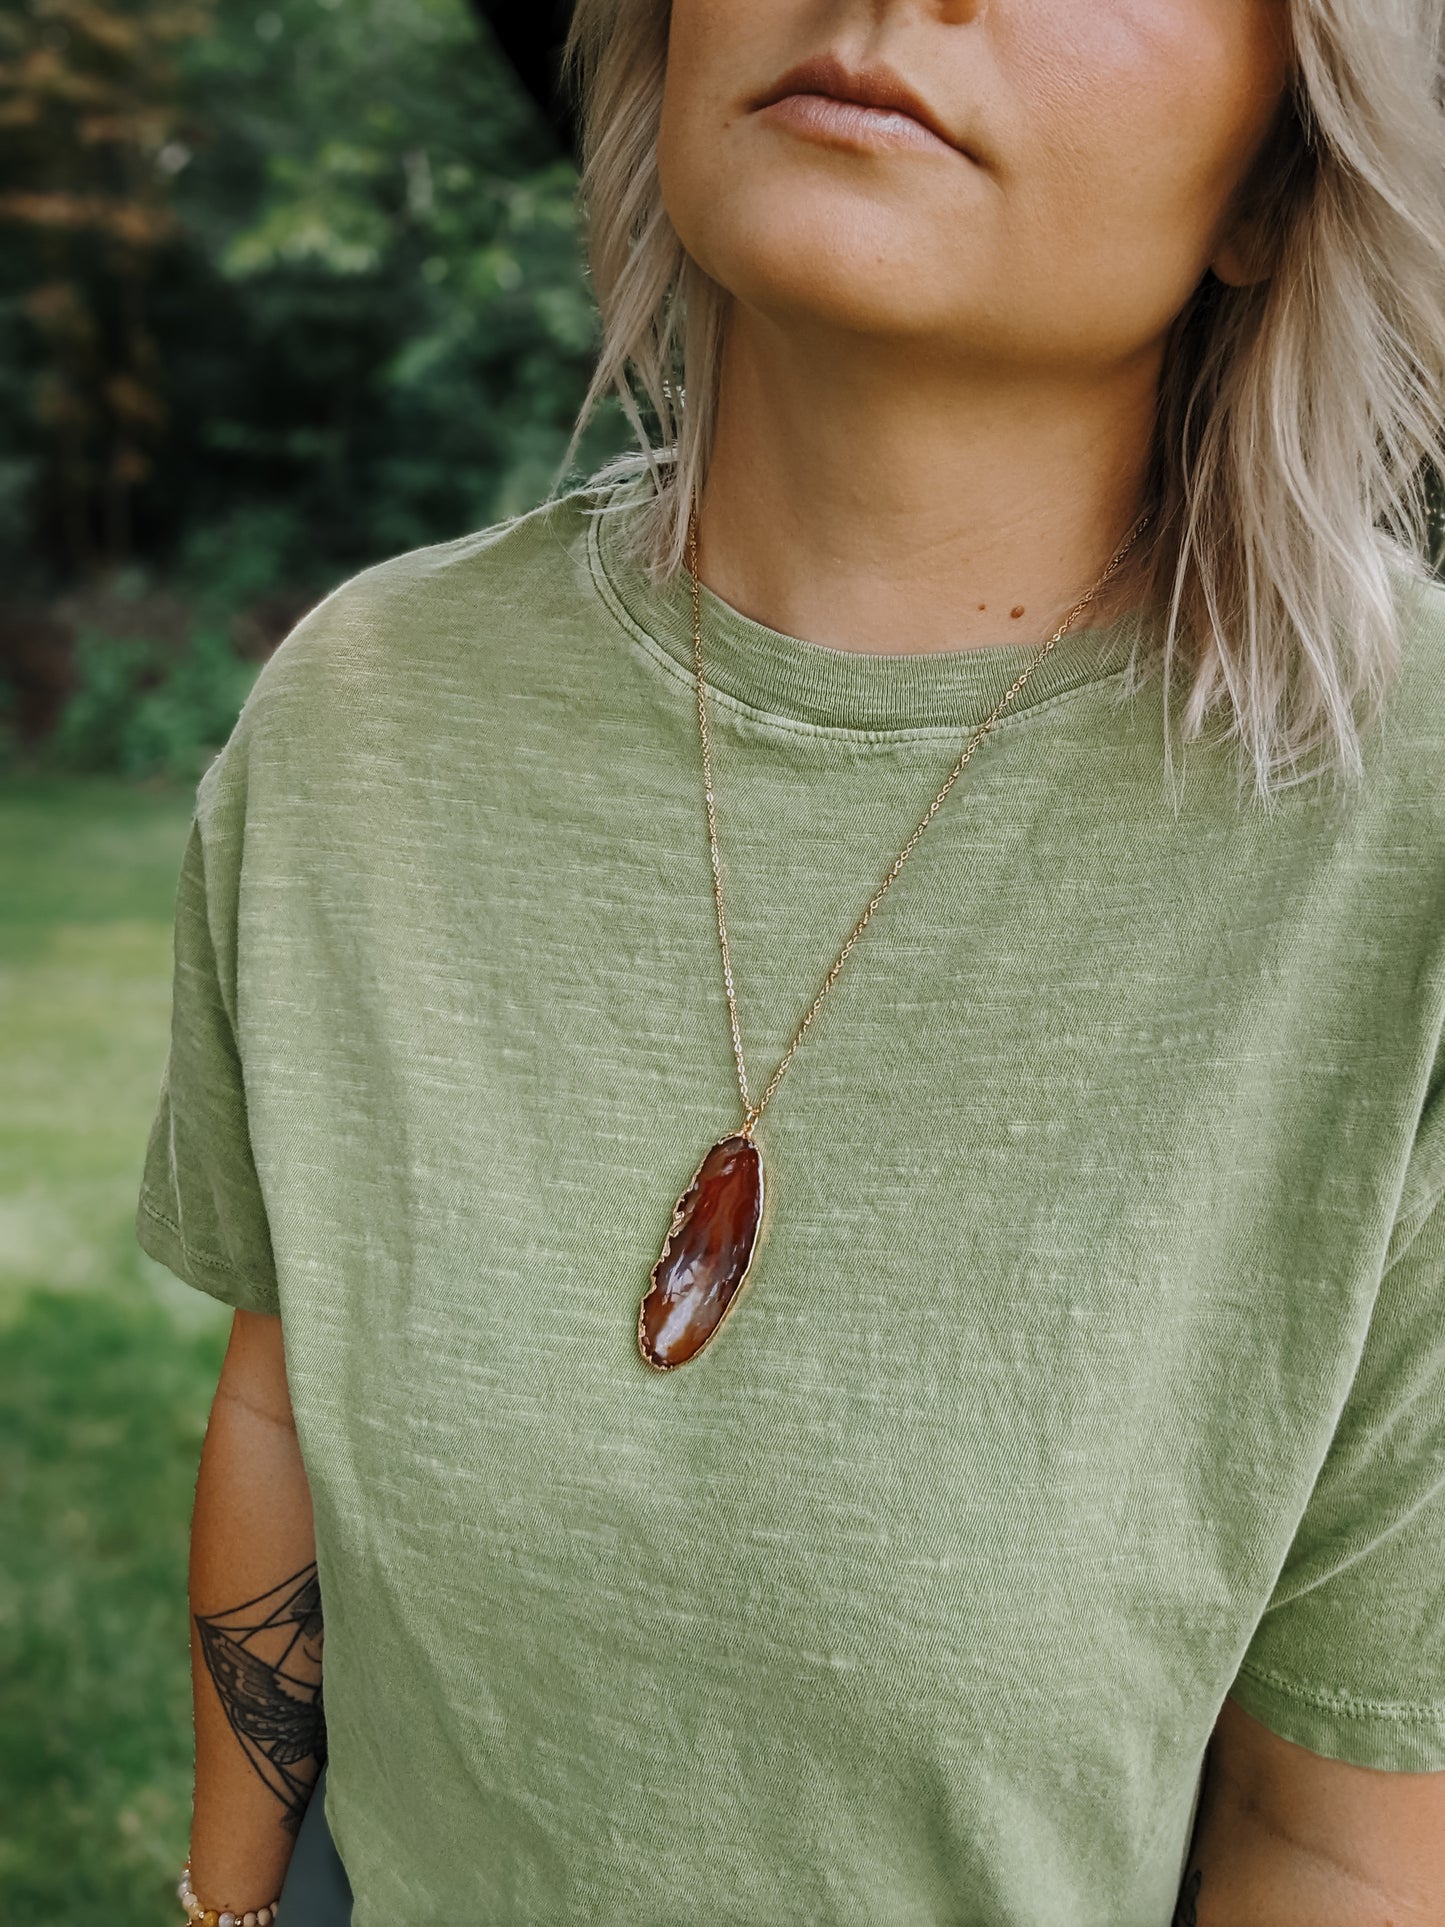 The Colors of Autumn Agate Necklace